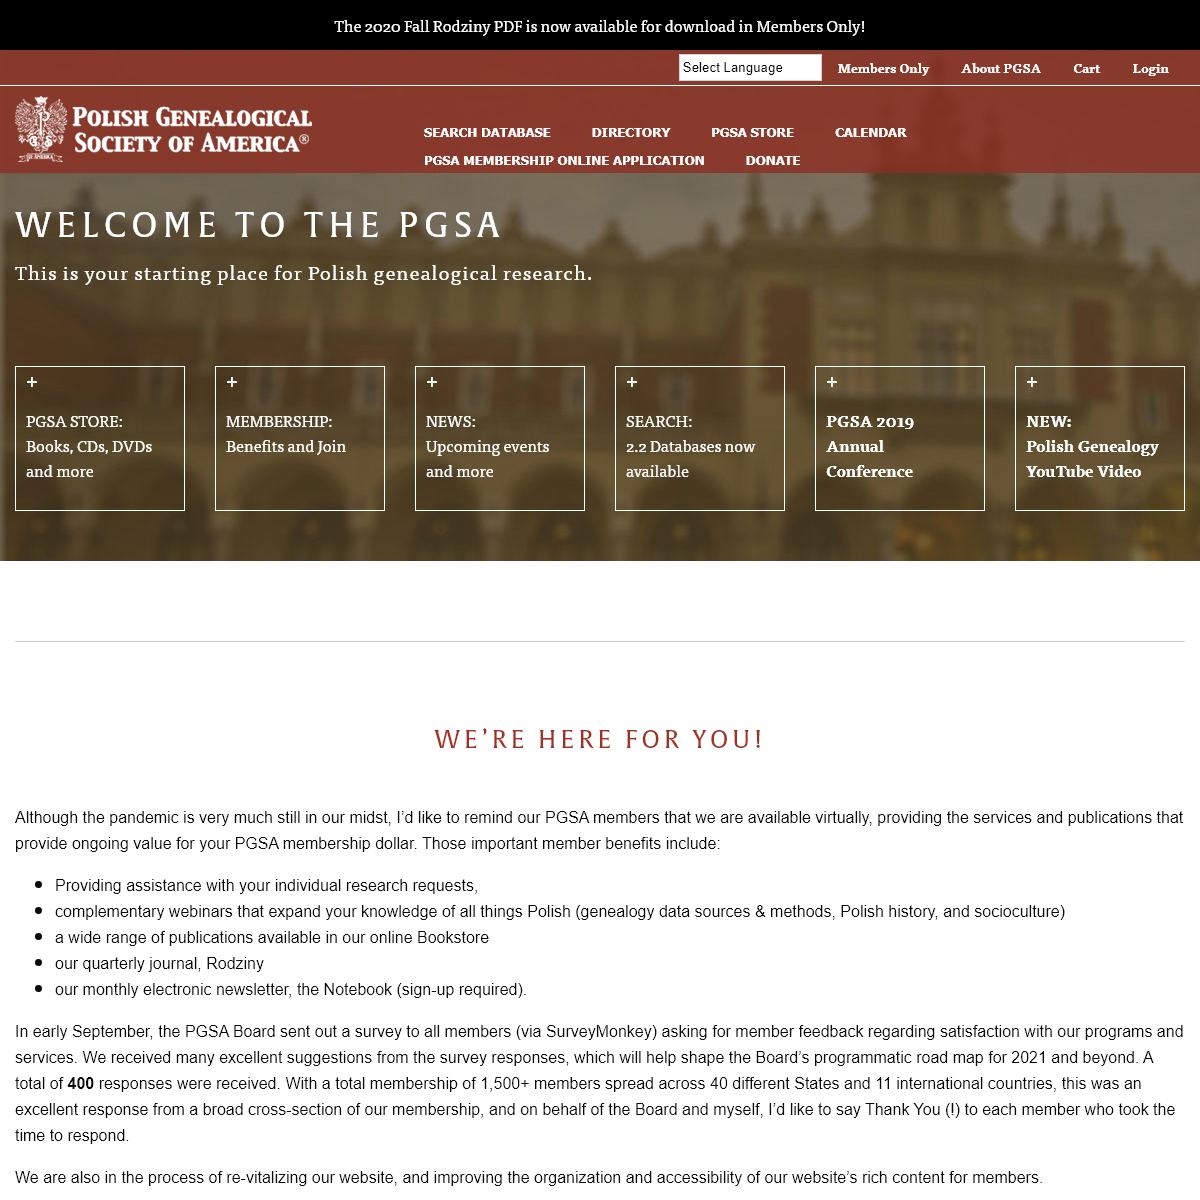 A complete backup of pgsa.org